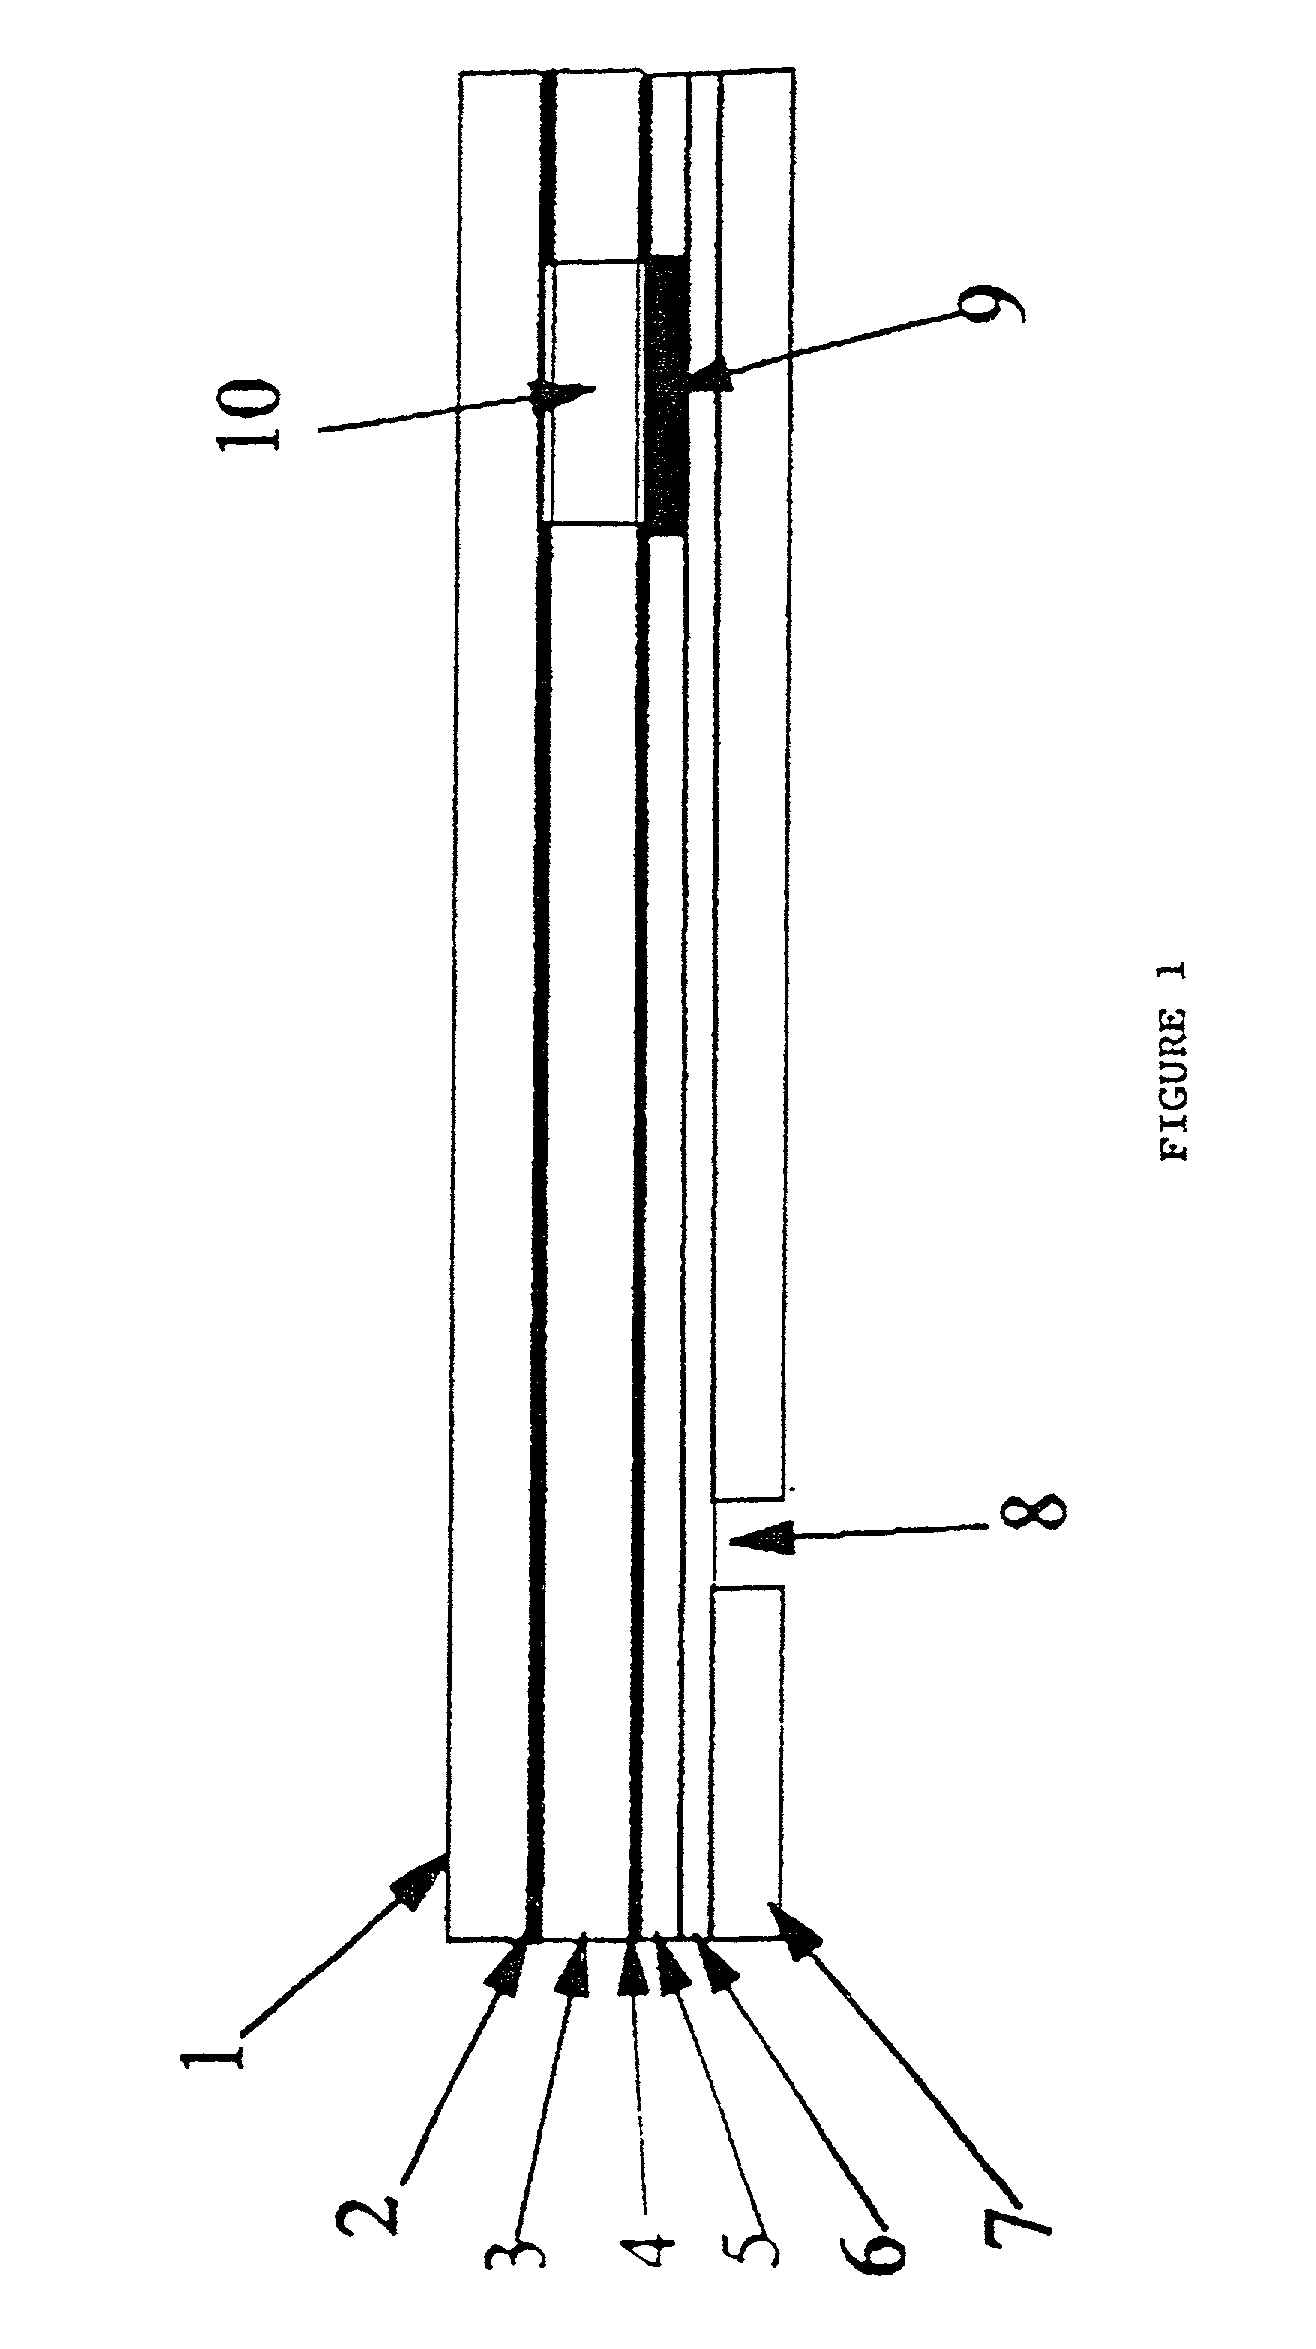 Heated electrochemical cell